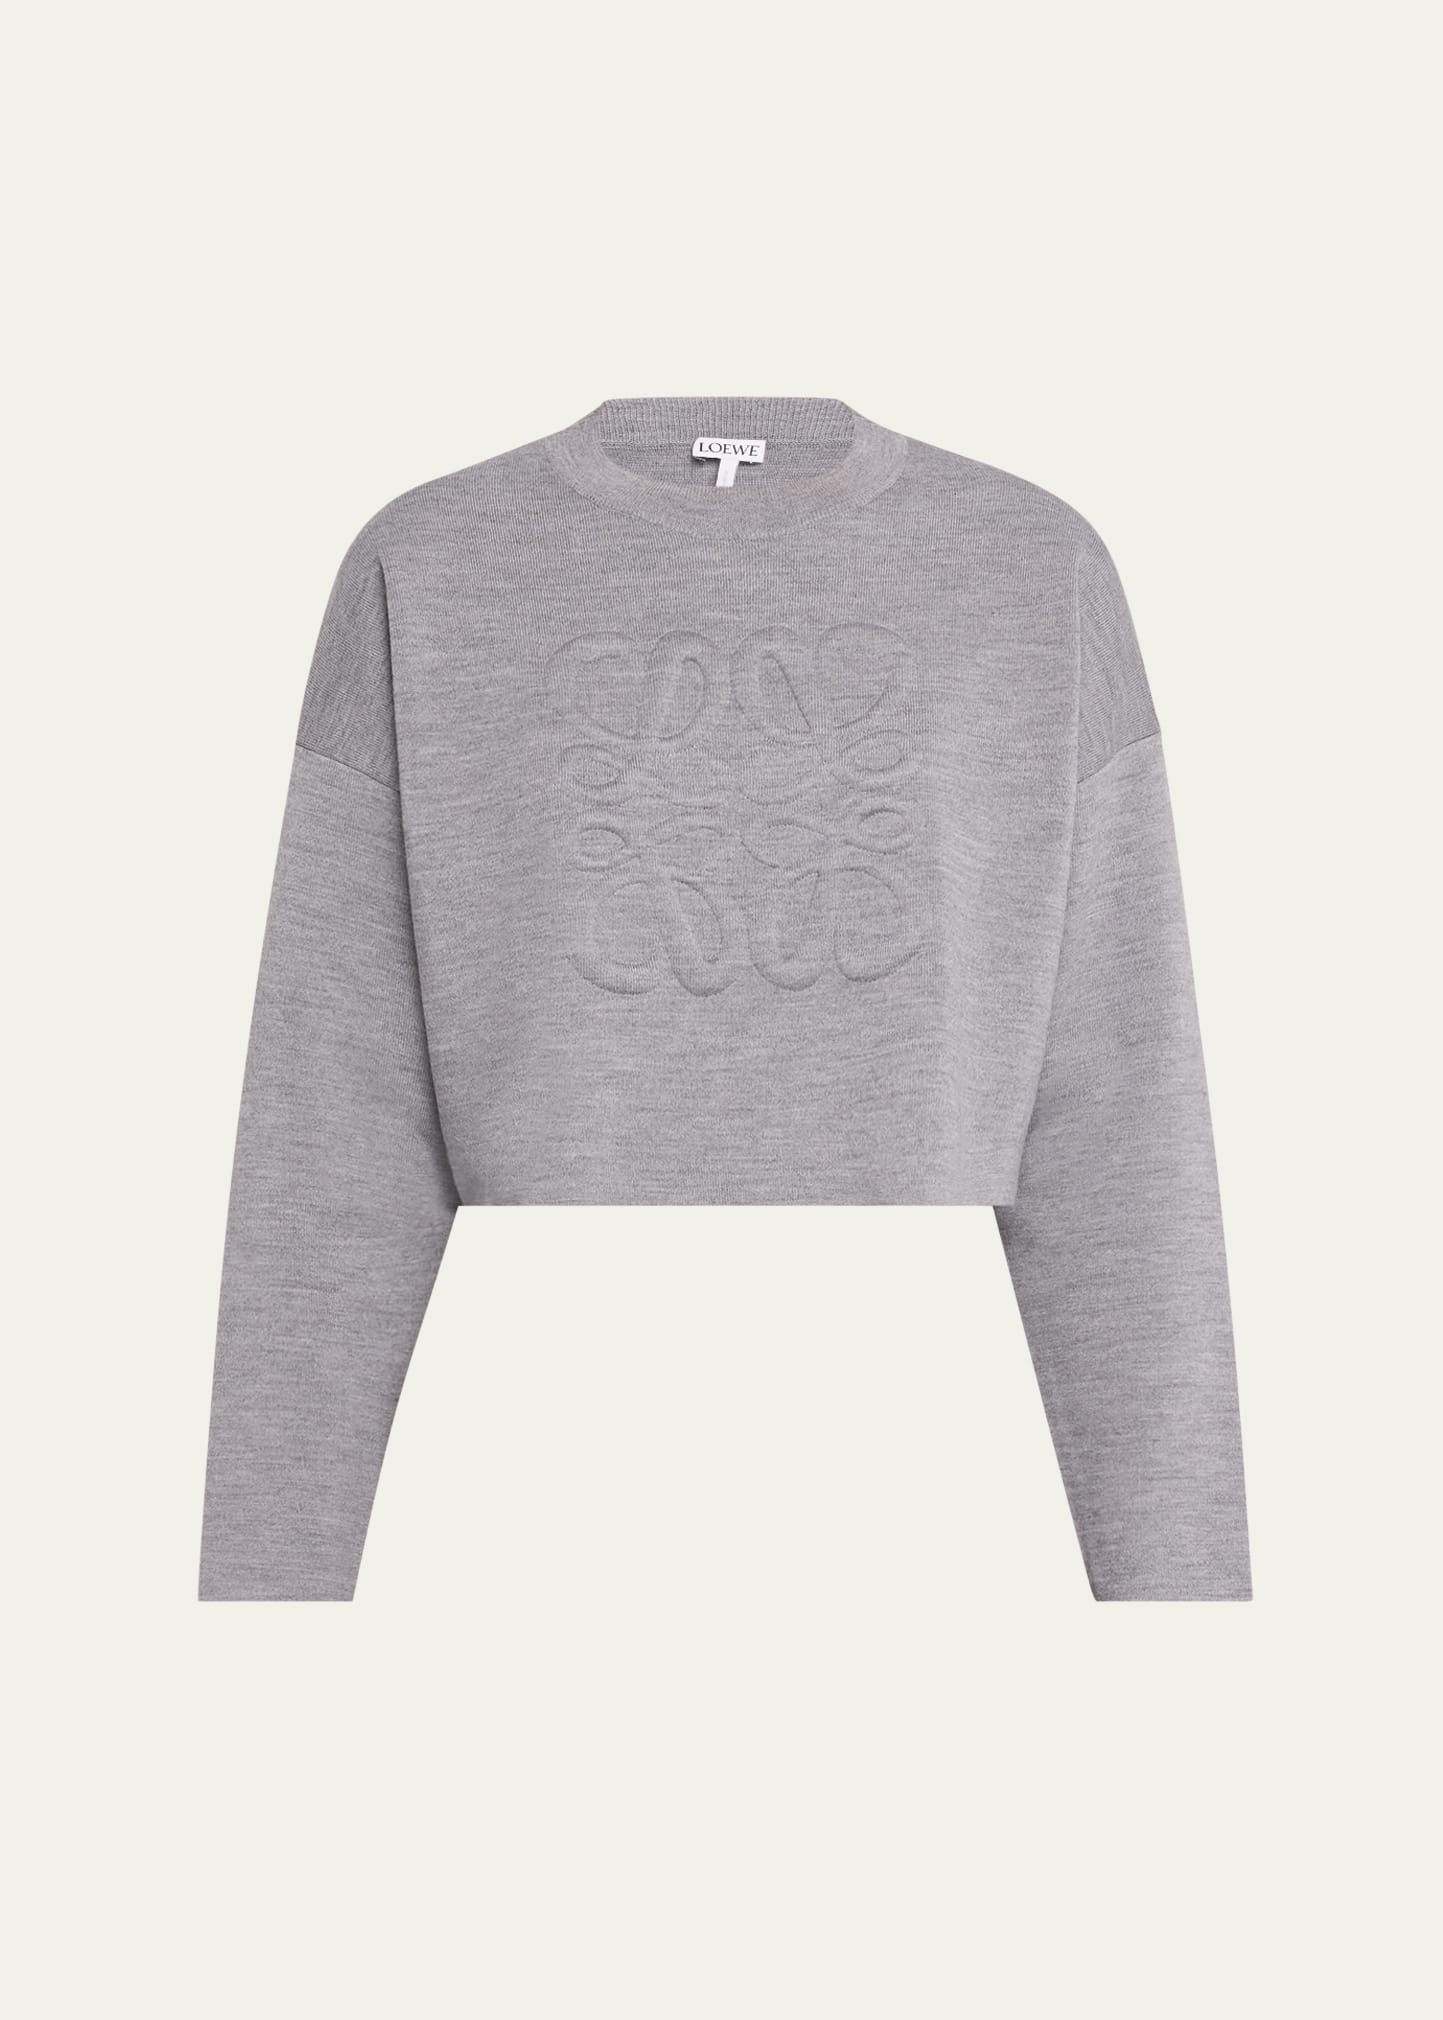 Loewe Short Wool Sweater With Anagram Detail In Gray